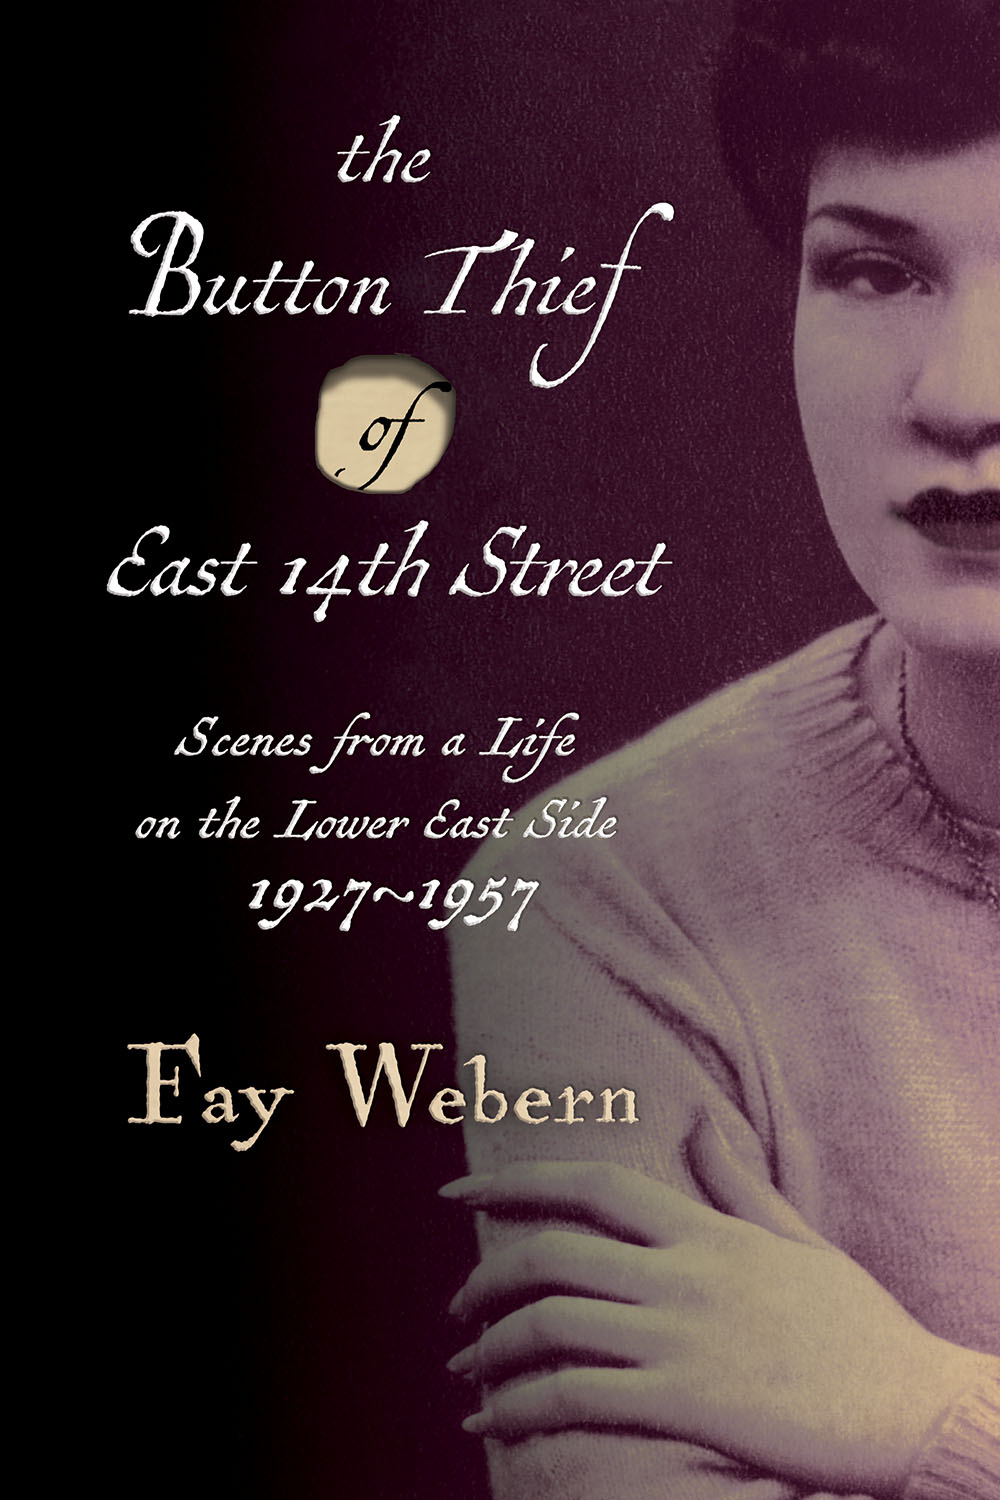 The Button Thief of East 14th St.